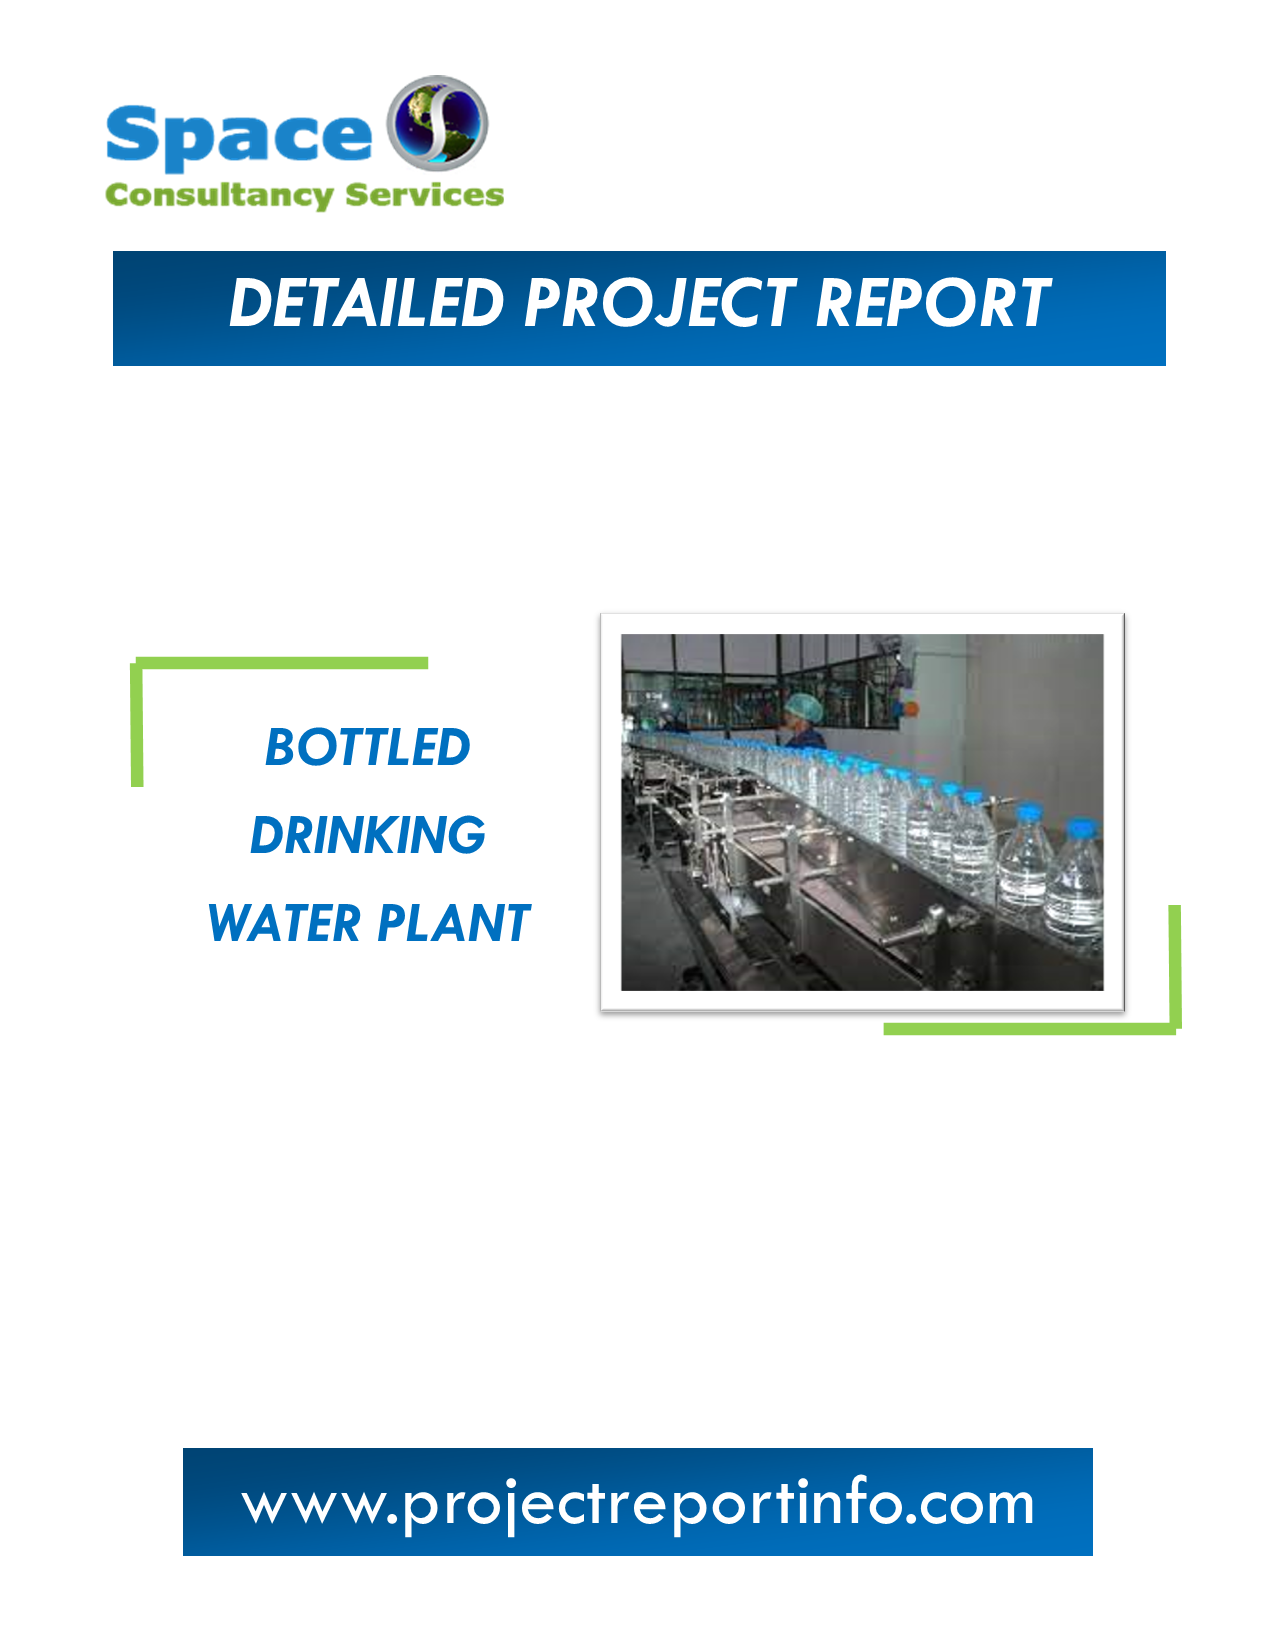 Project Report on Bottled Drinking Water Plant